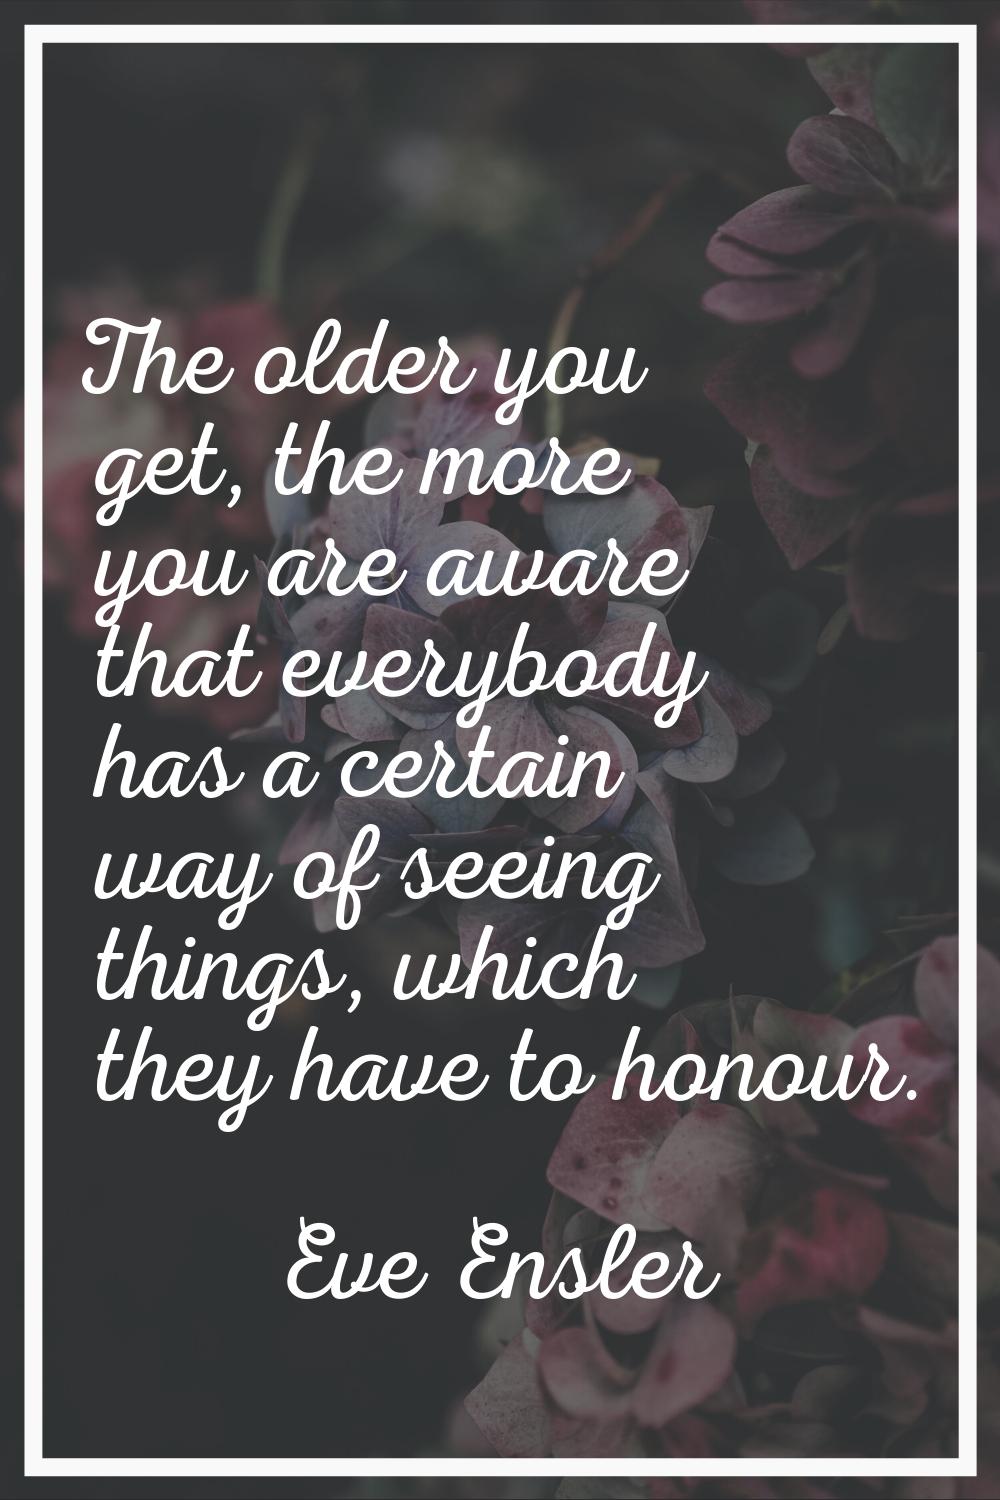 The older you get, the more you are aware that everybody has a certain way of seeing things, which 